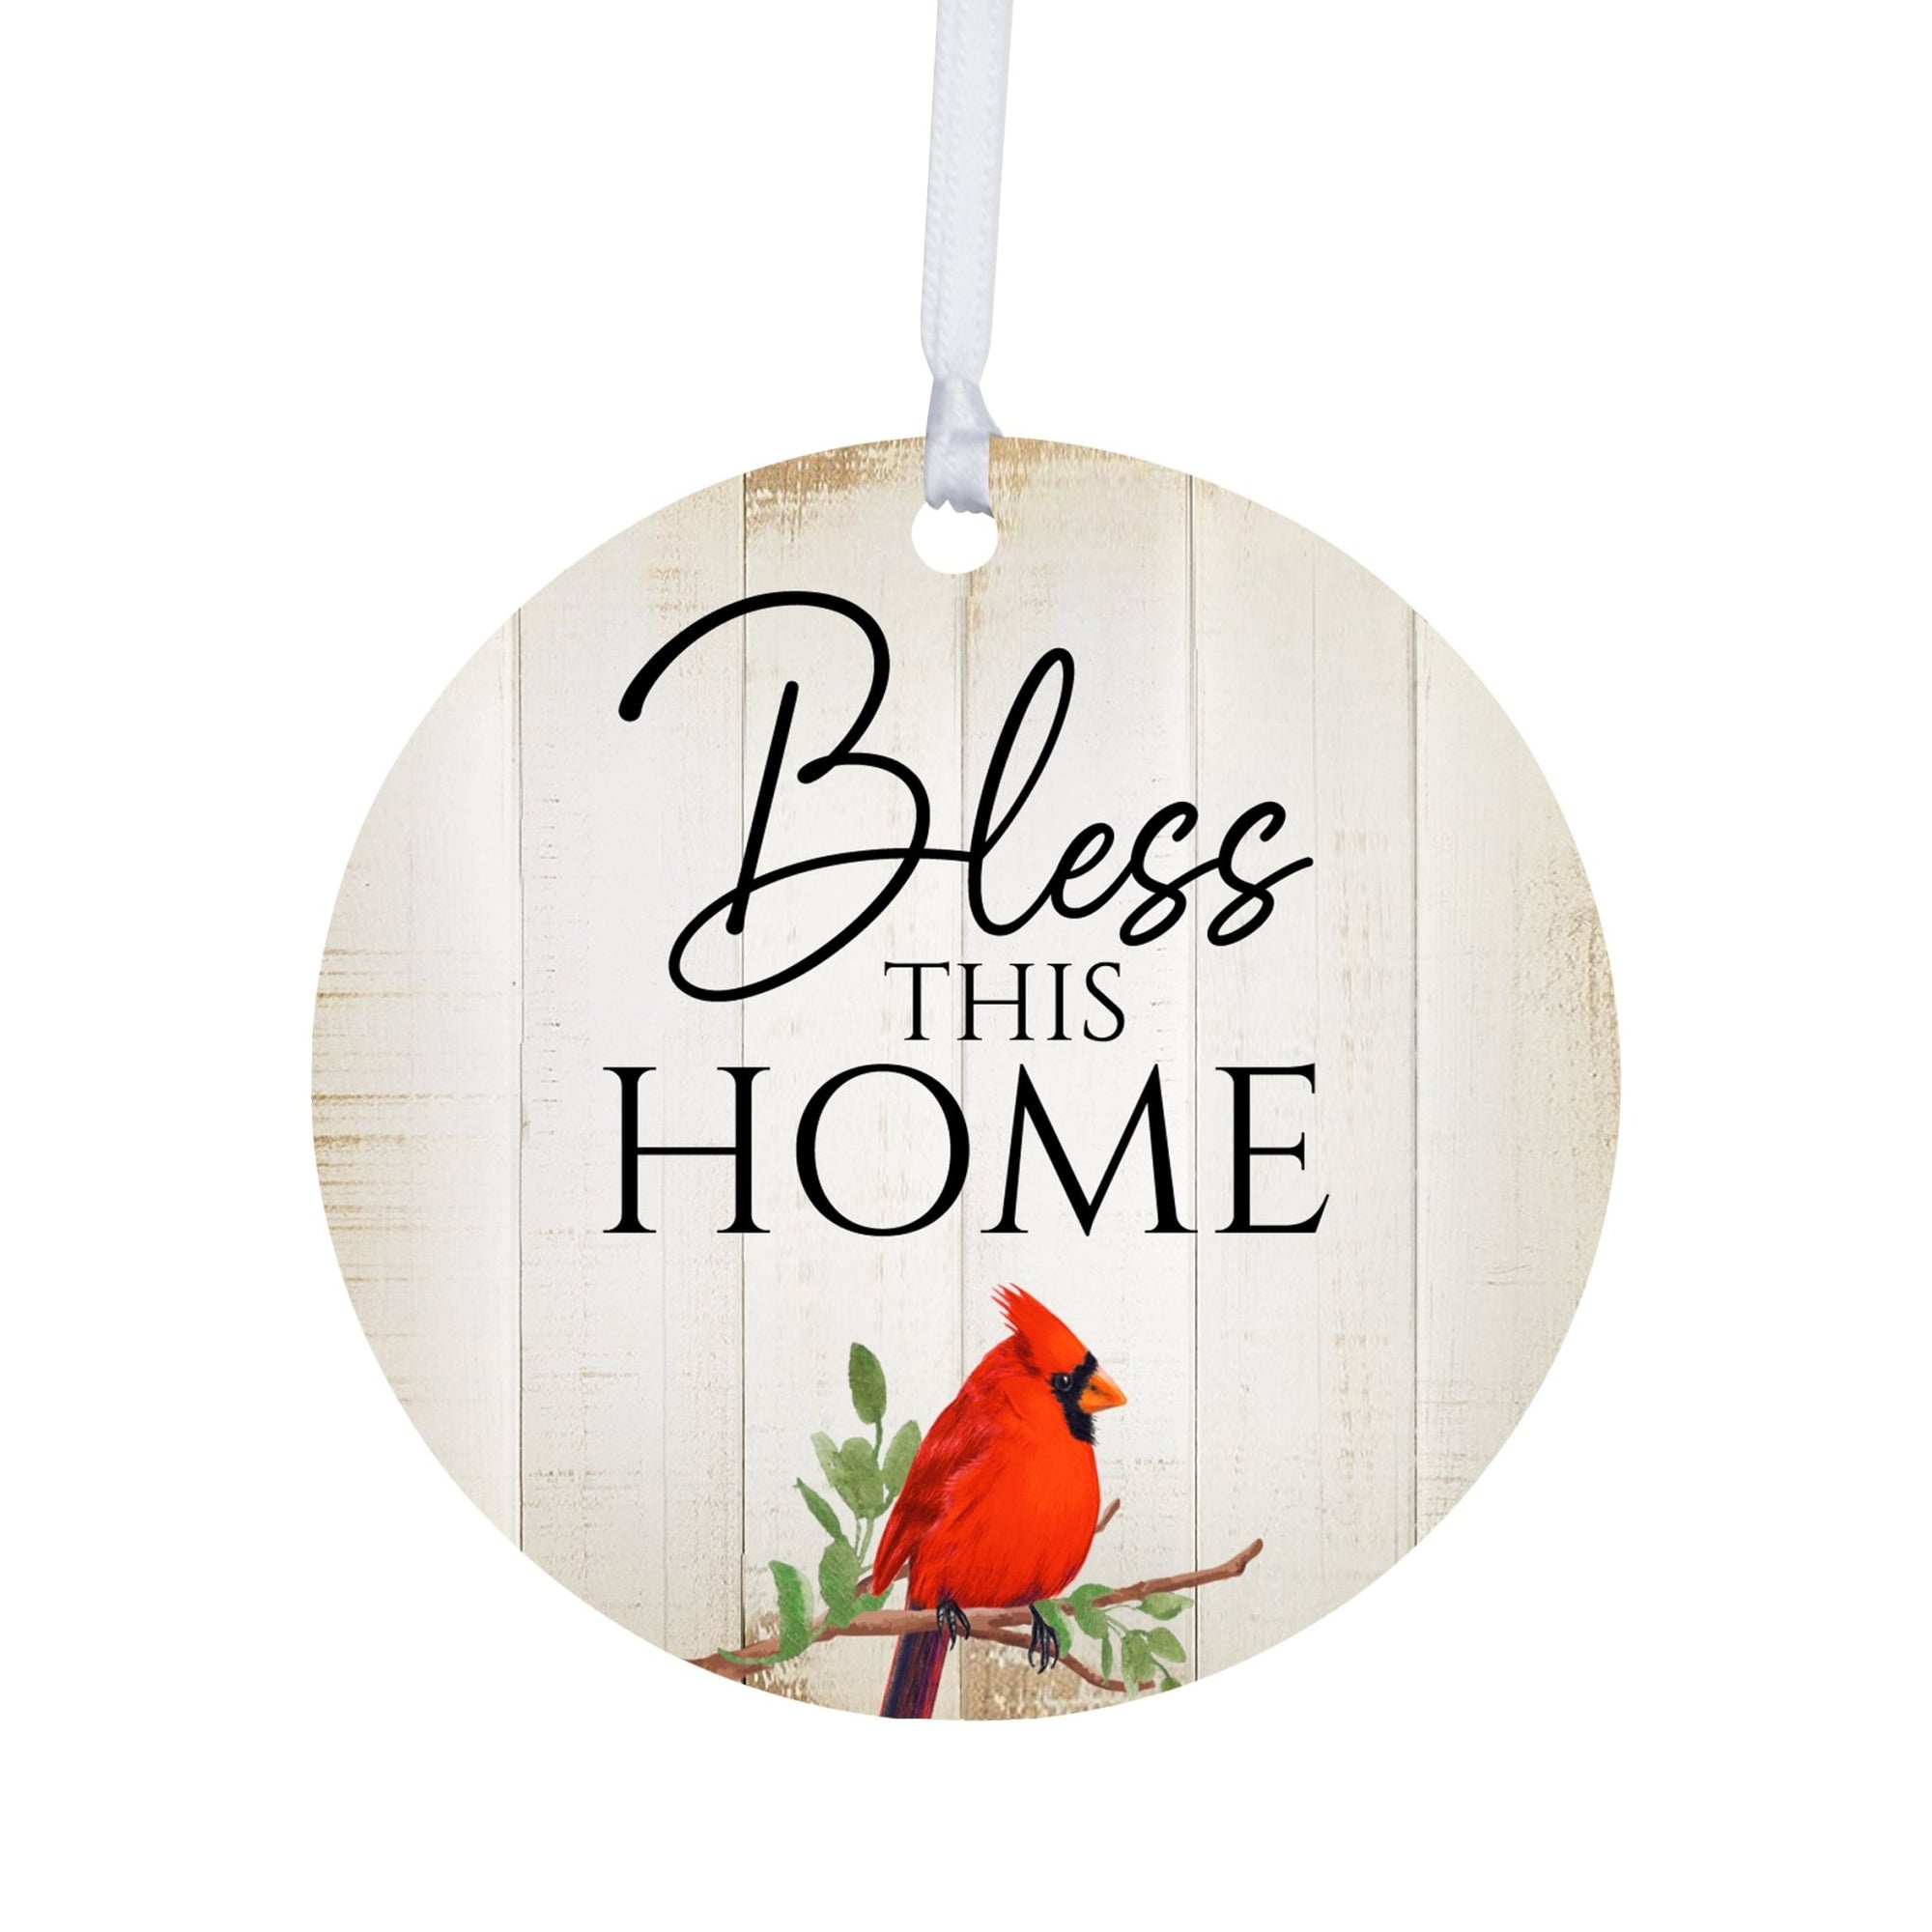 Vintage-Inspired Cardinal Ornament With Everyday Verses Gift Ideas - Bless This Home - LifeSong Milestones